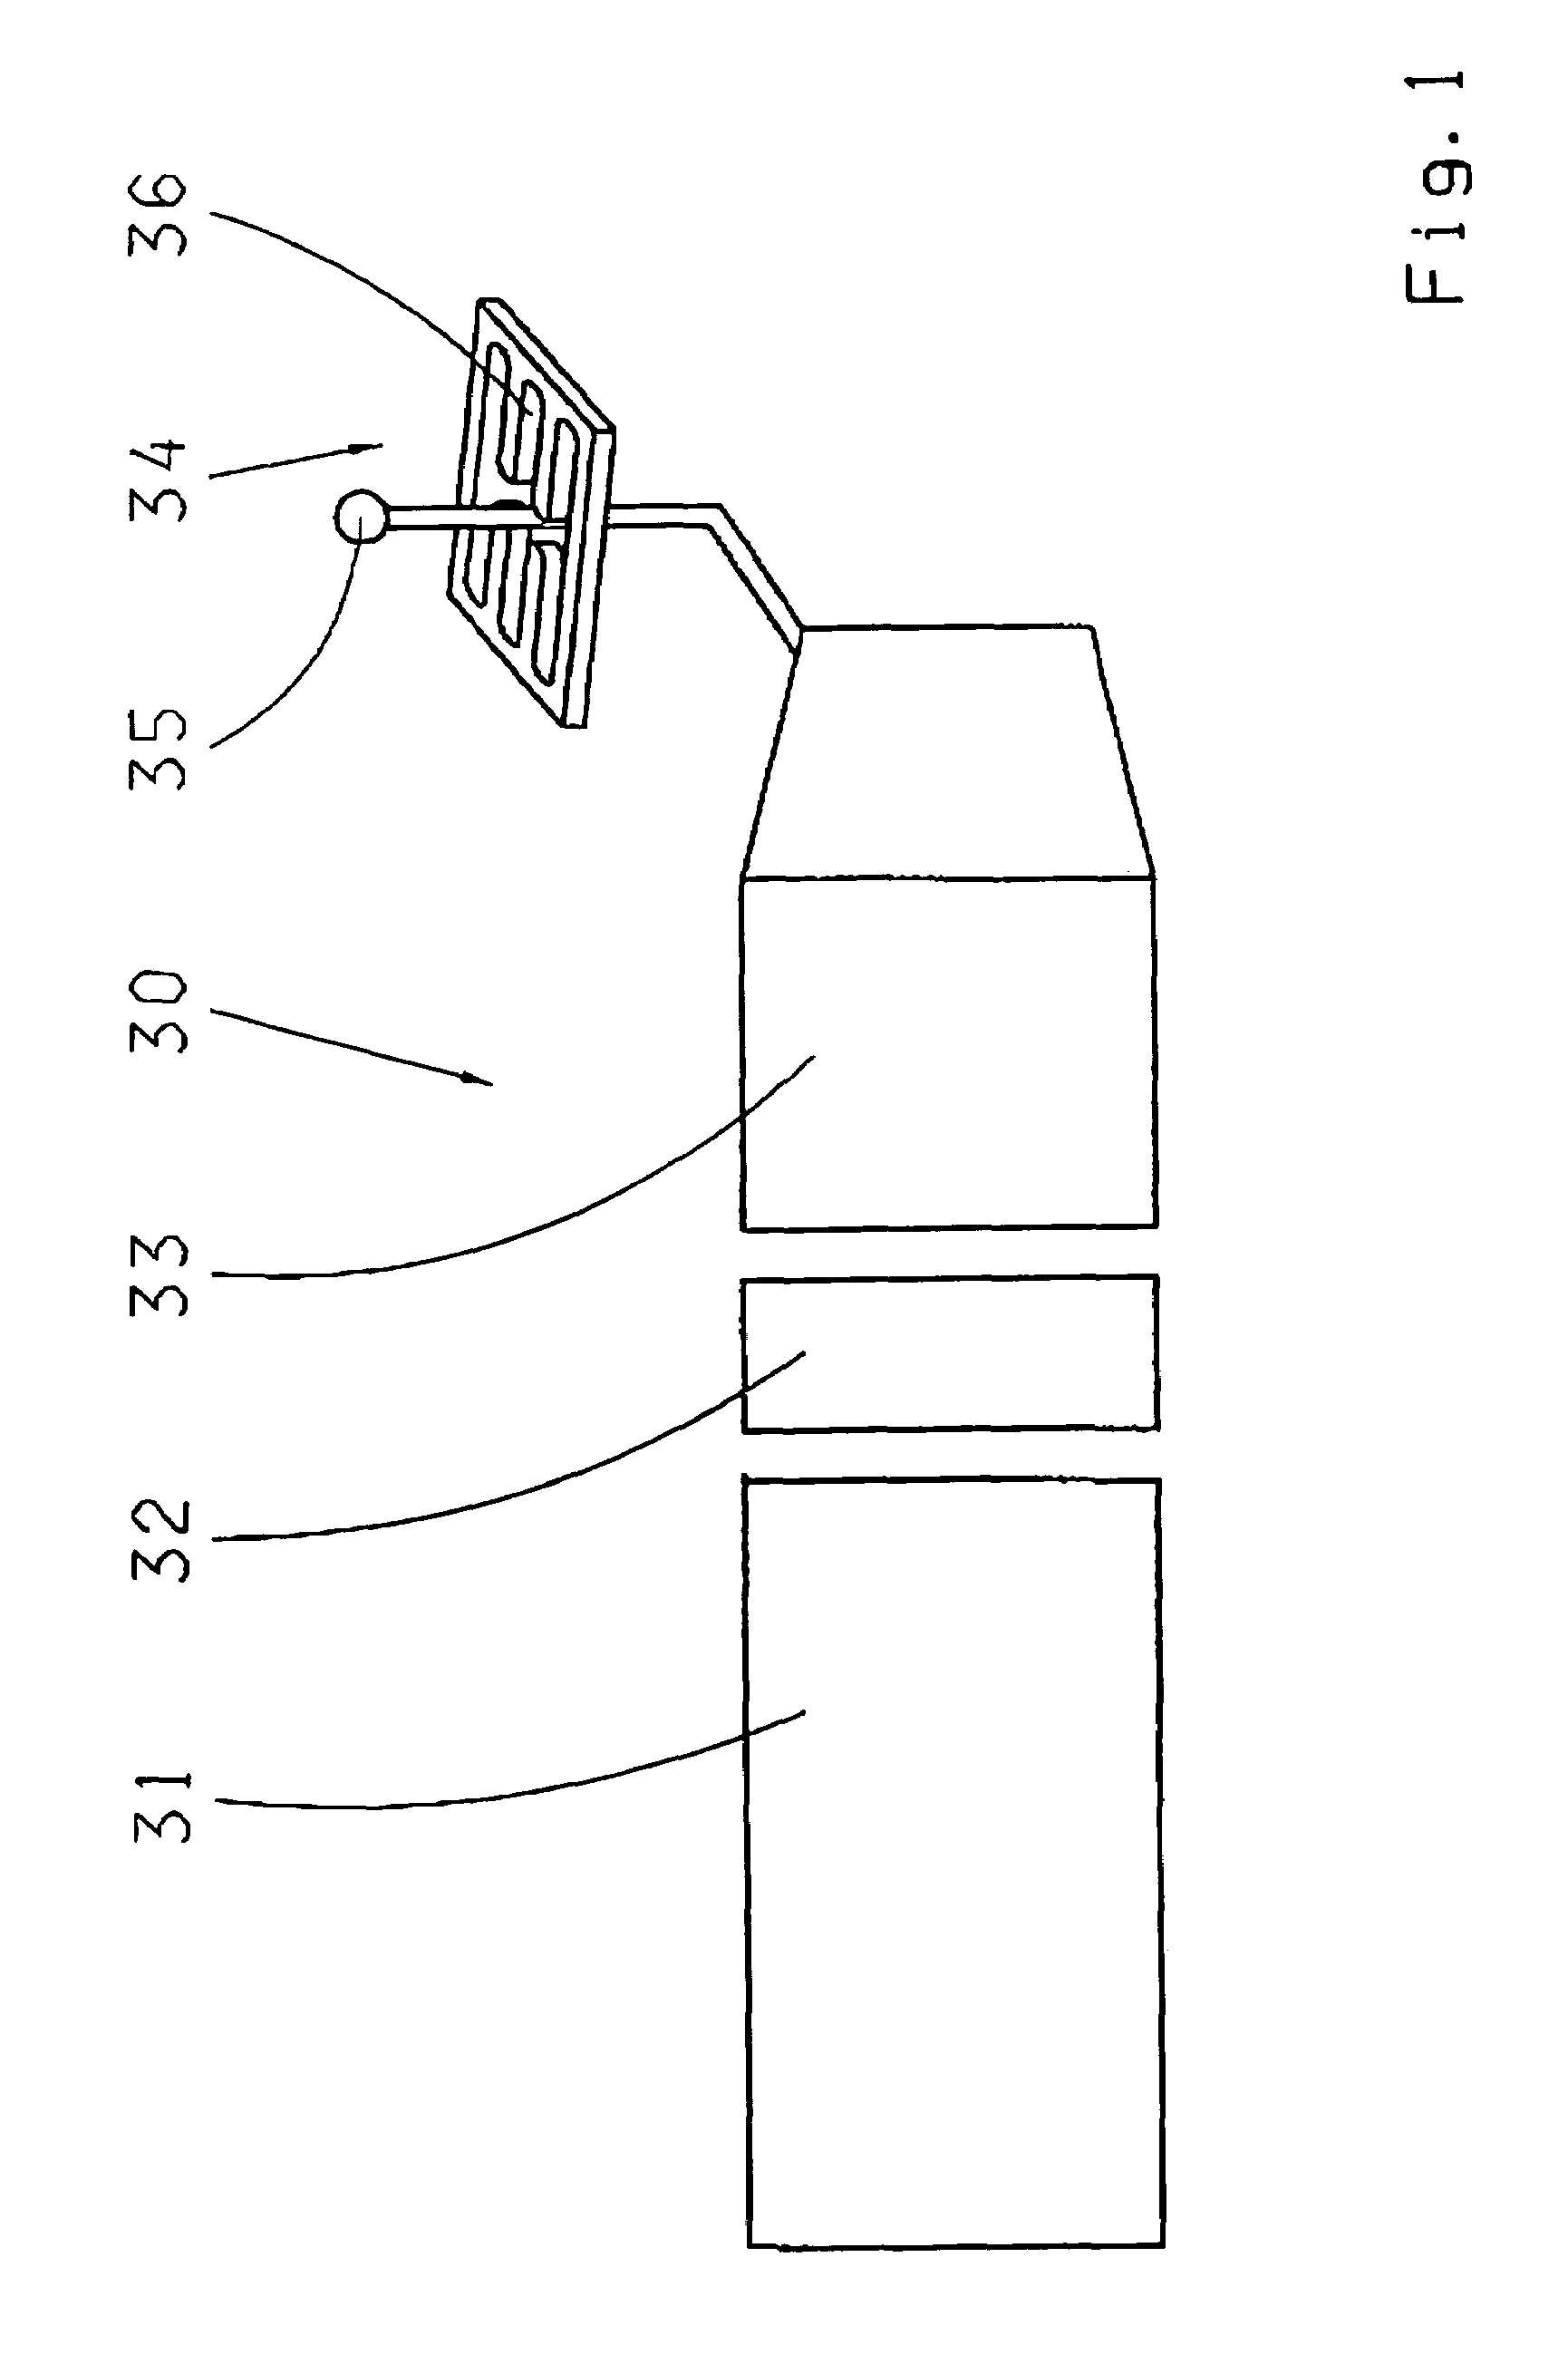 Shifting device for a transmission